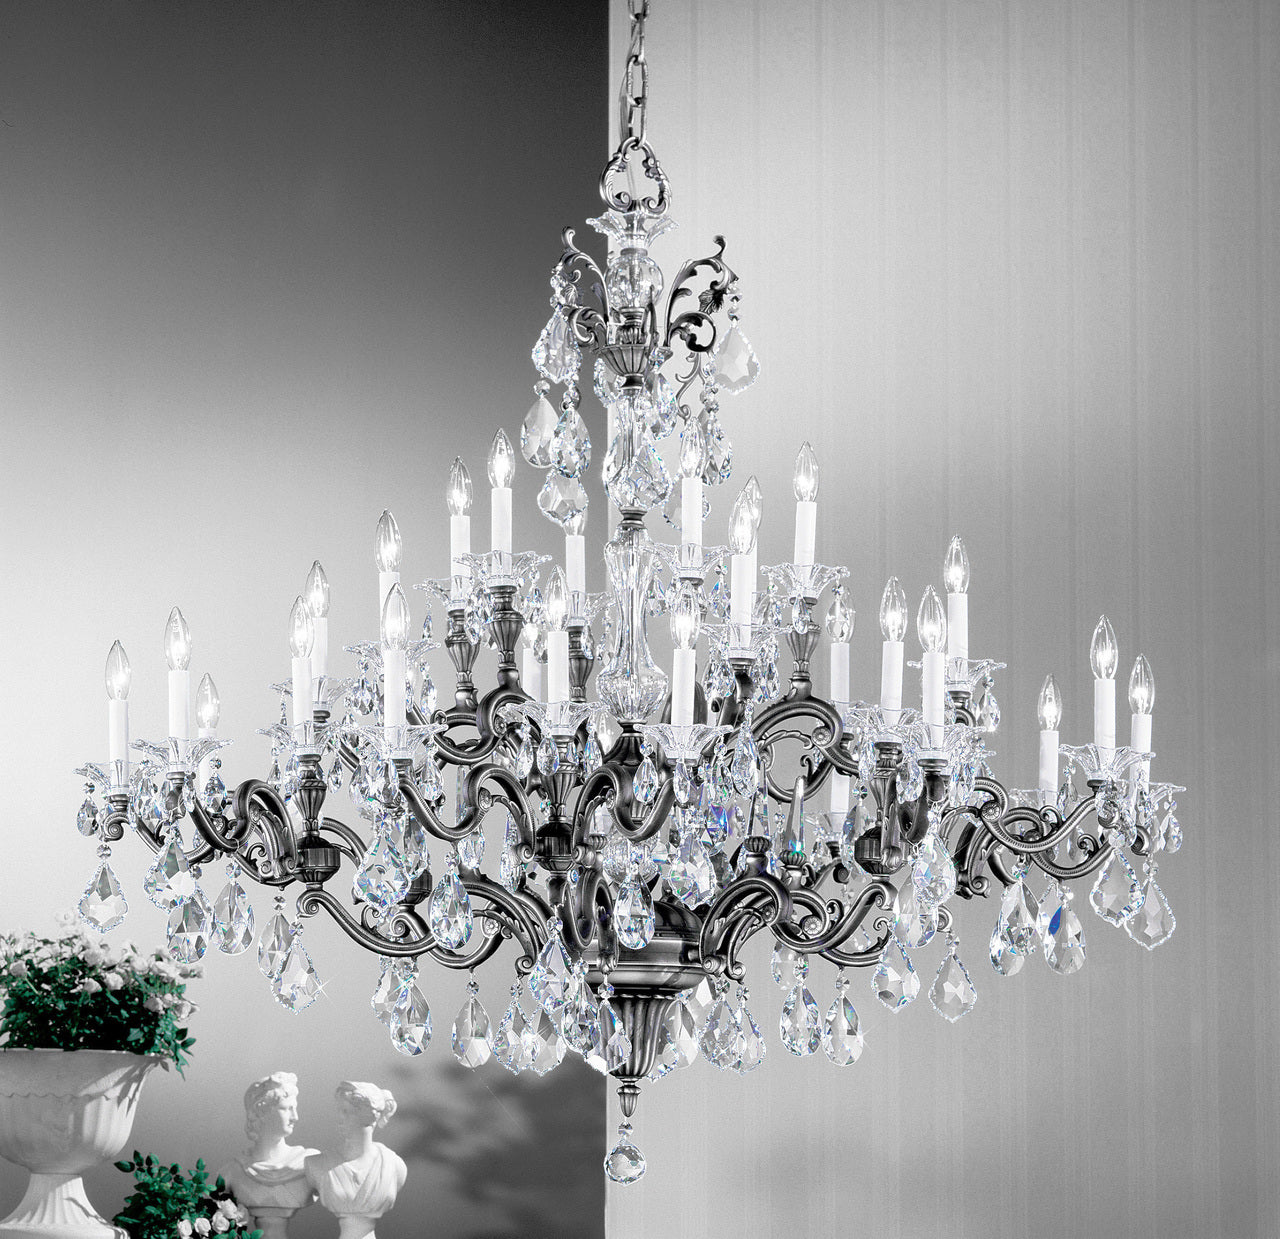 Classic Lighting 57130 MS IRC Via Firenze Crystal Chandelier in Millennium Silver (Imported from Spain)